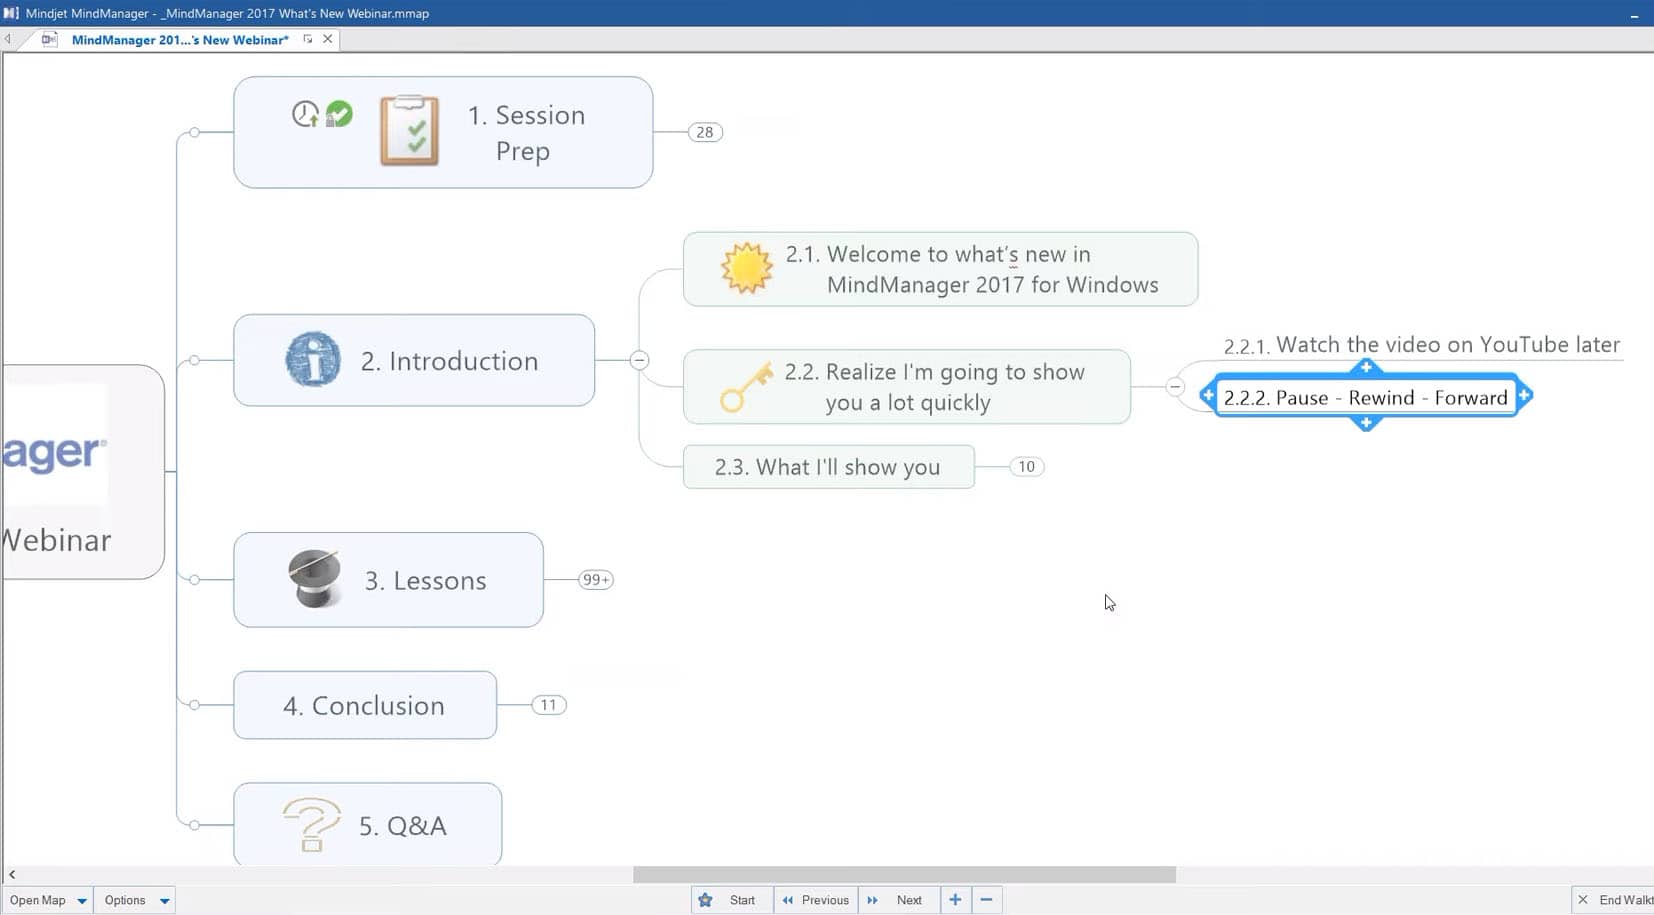 What's New in MindManager 2017 for Windows